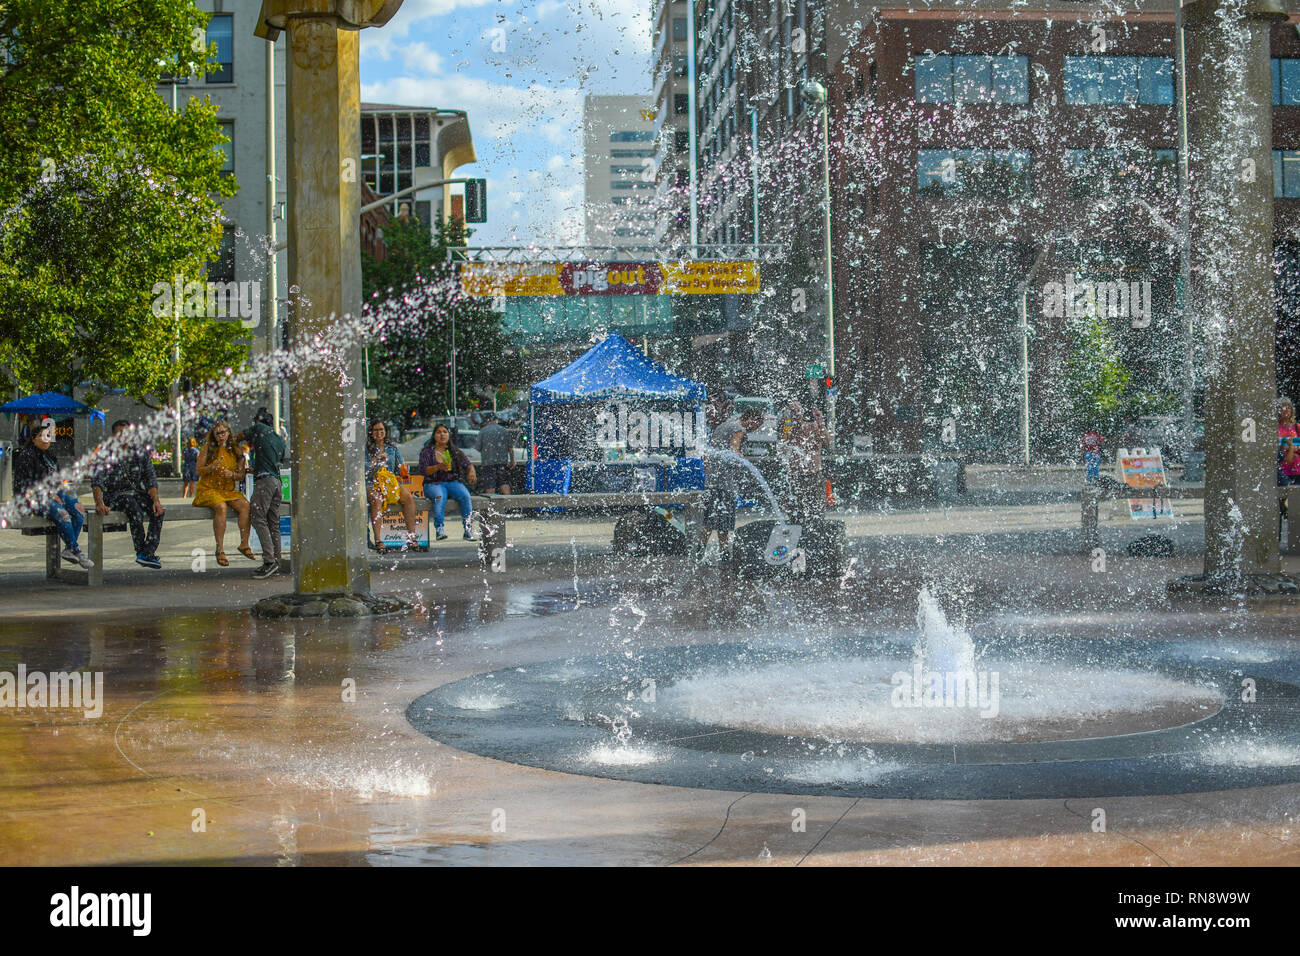 Tourists and locals enjoy a summer day at Riverfront Park in Spokane, Washington, as they sit around the Rotary Fountain and watch the water spray Stock Photo